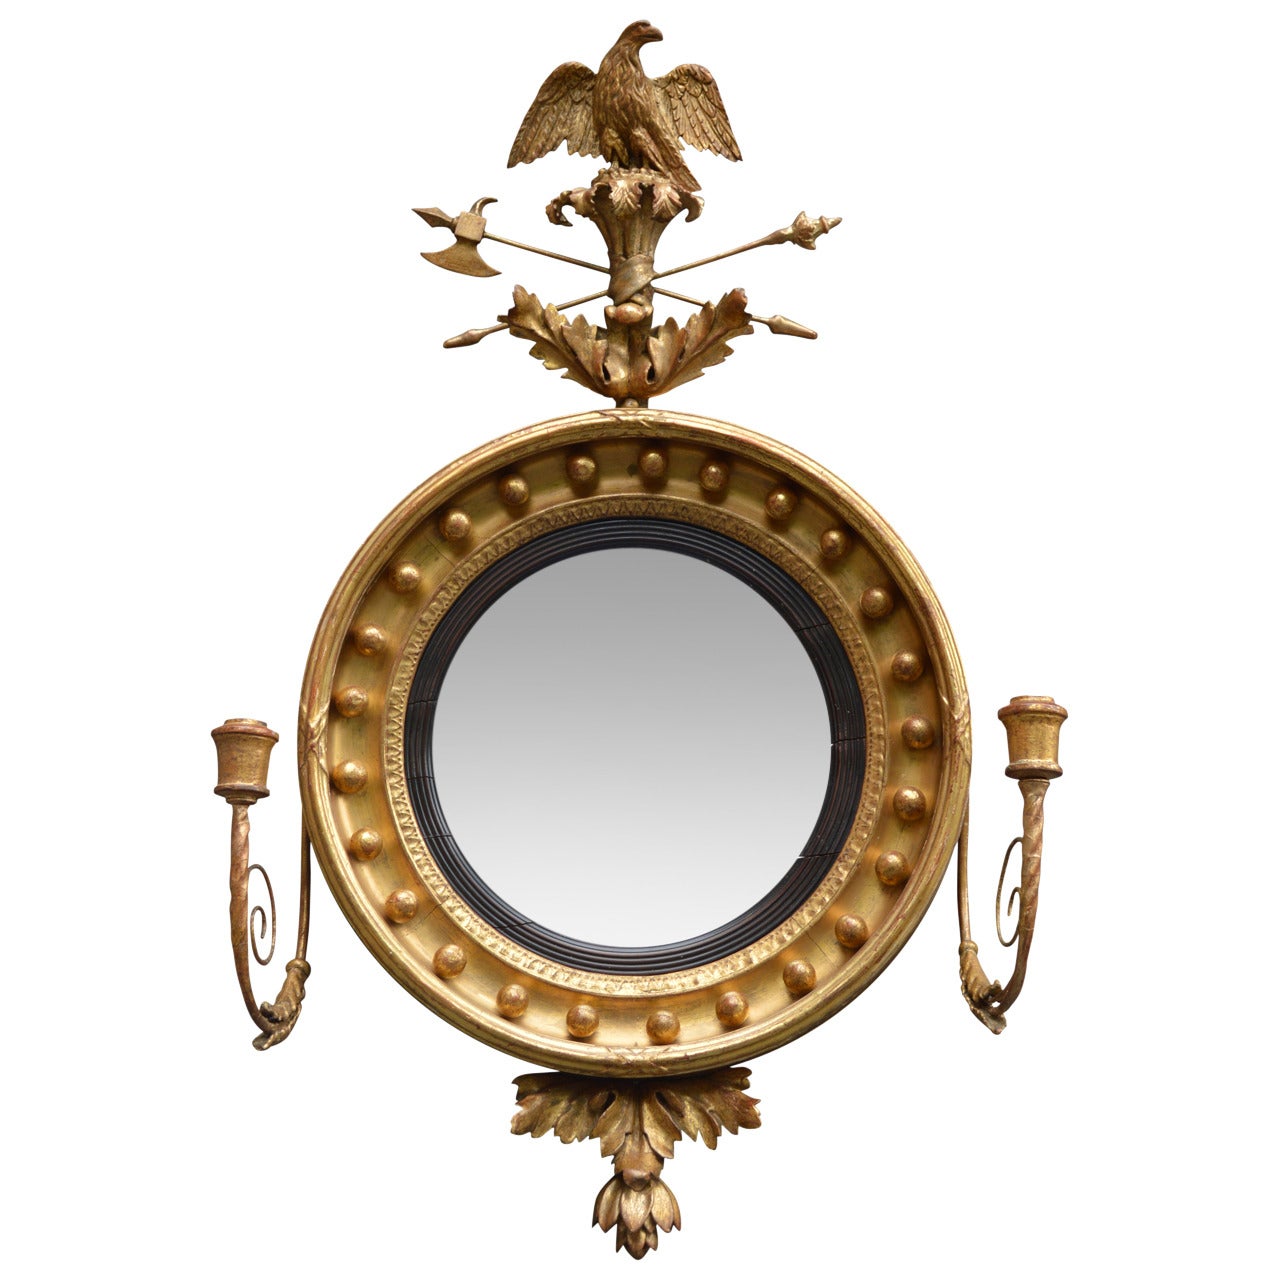 Early 19th C. Regency Period Carved Giltwood Mirror